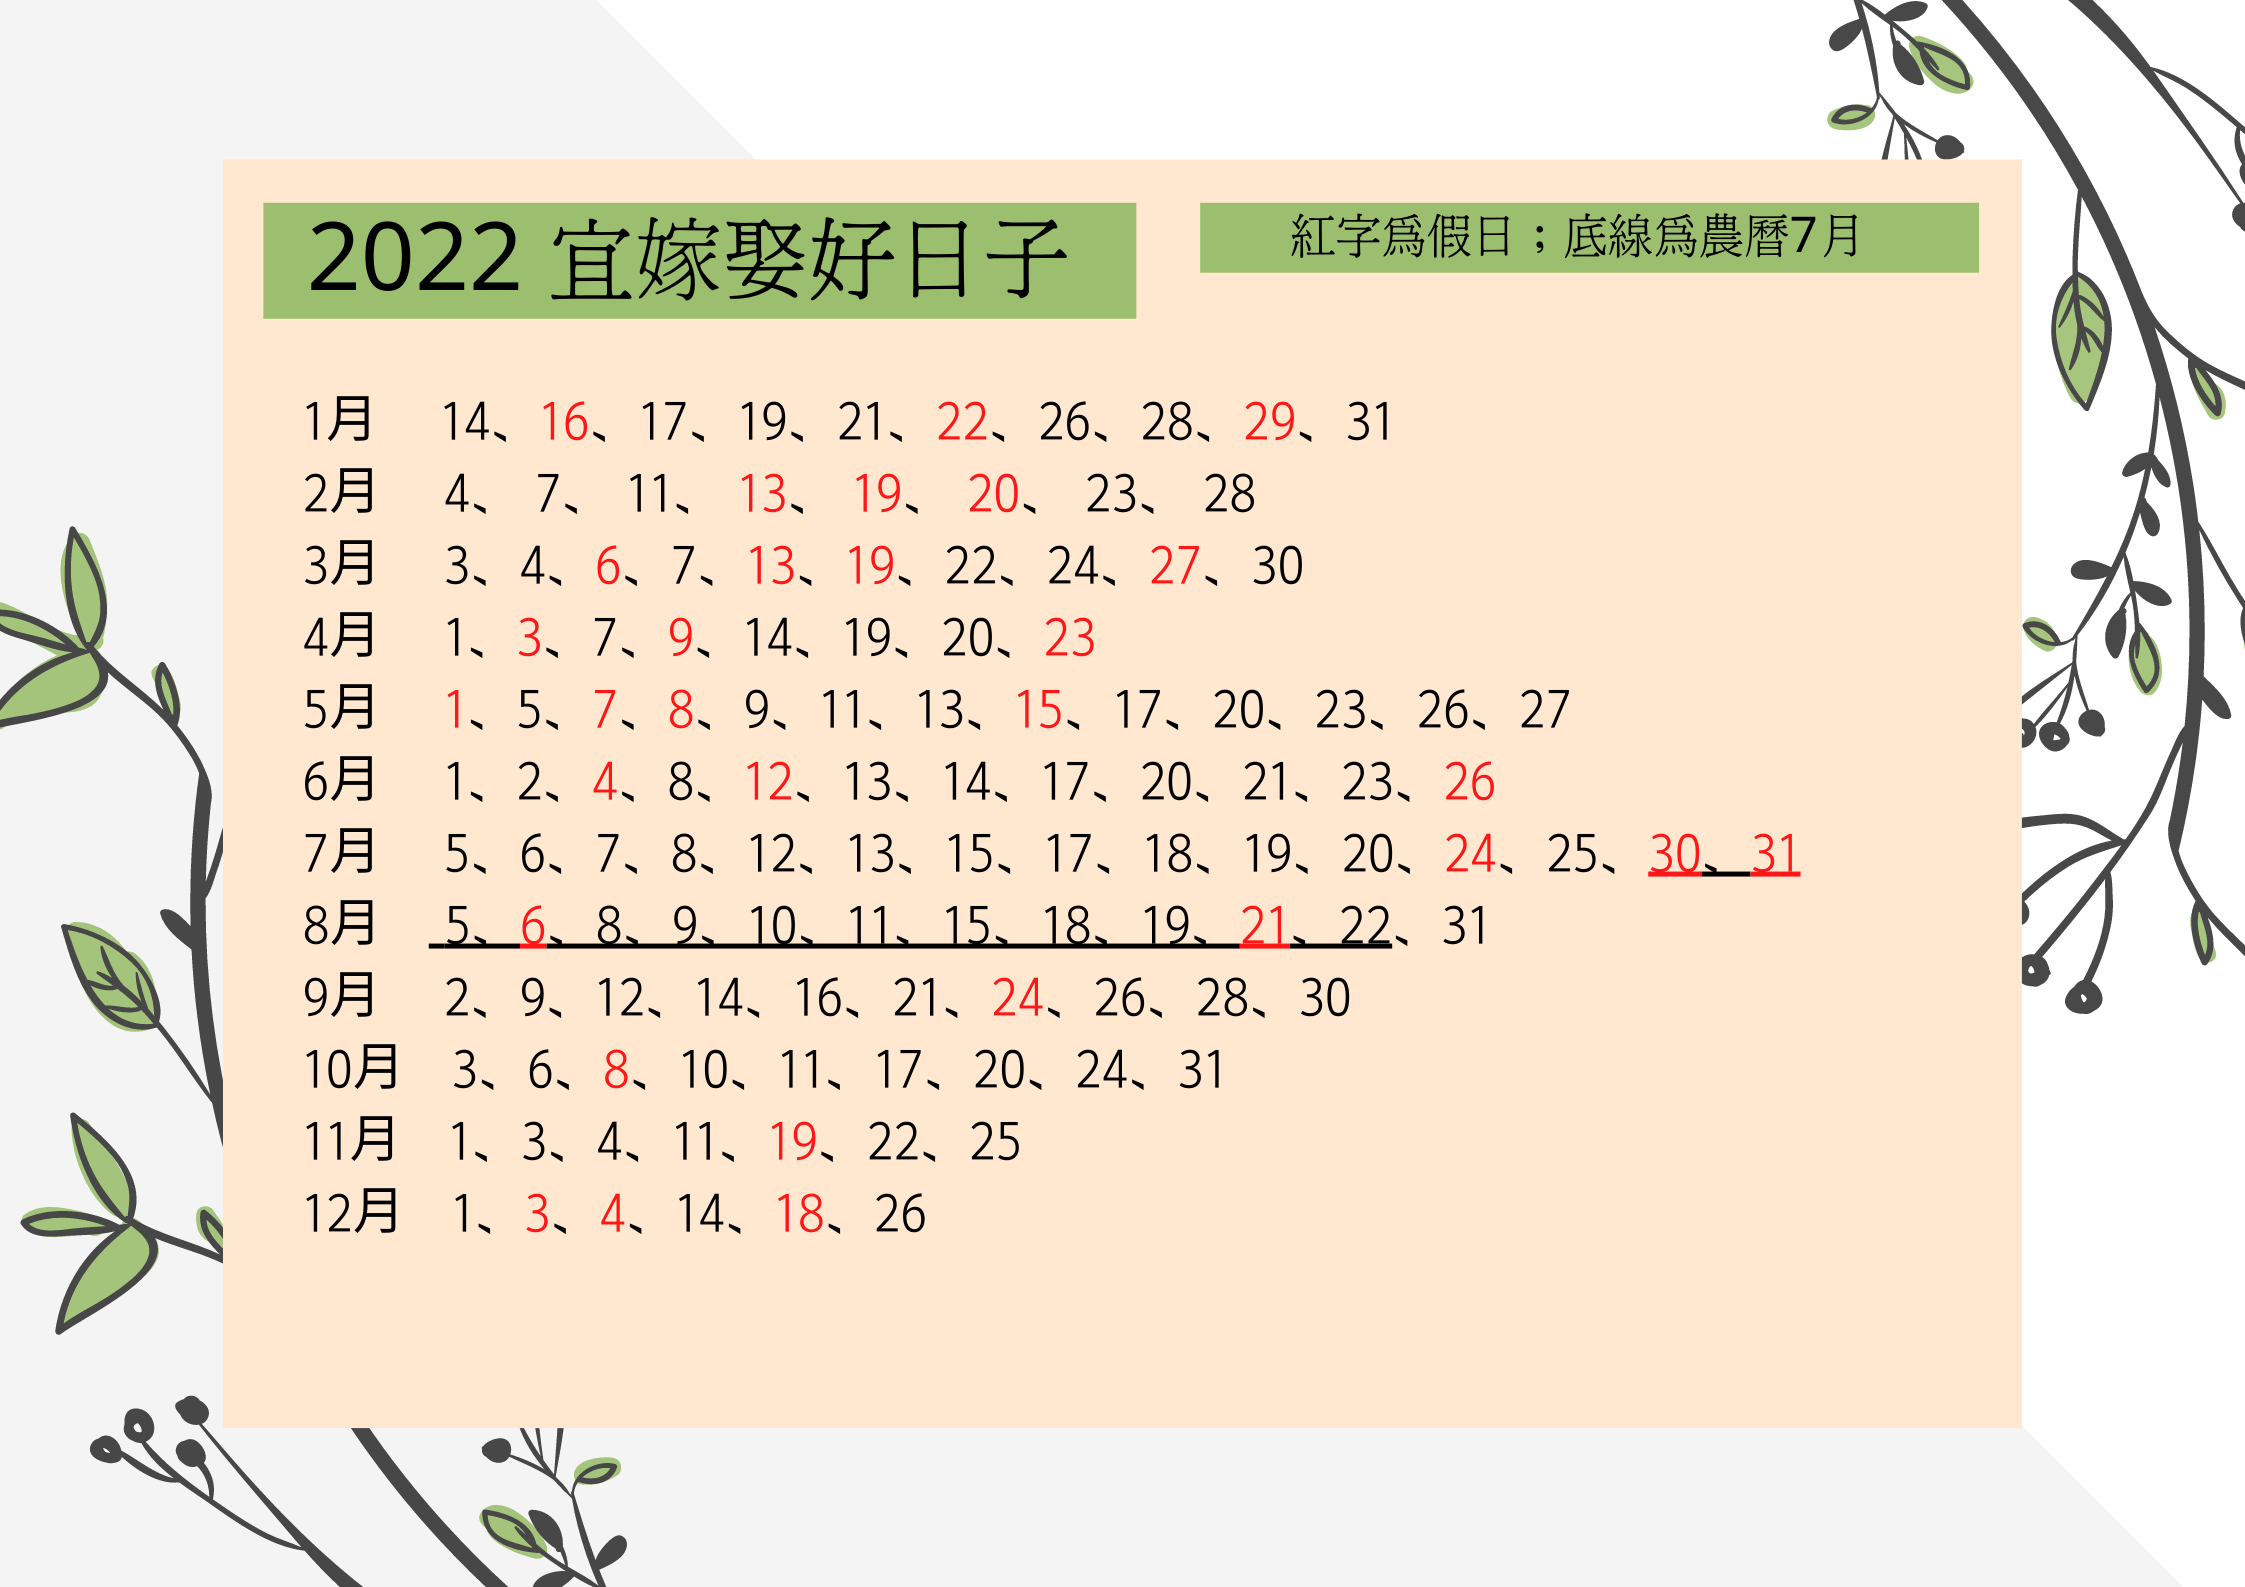 Read more about the article 2022結婚好日子出爐啦！吉日統整 一看明了！